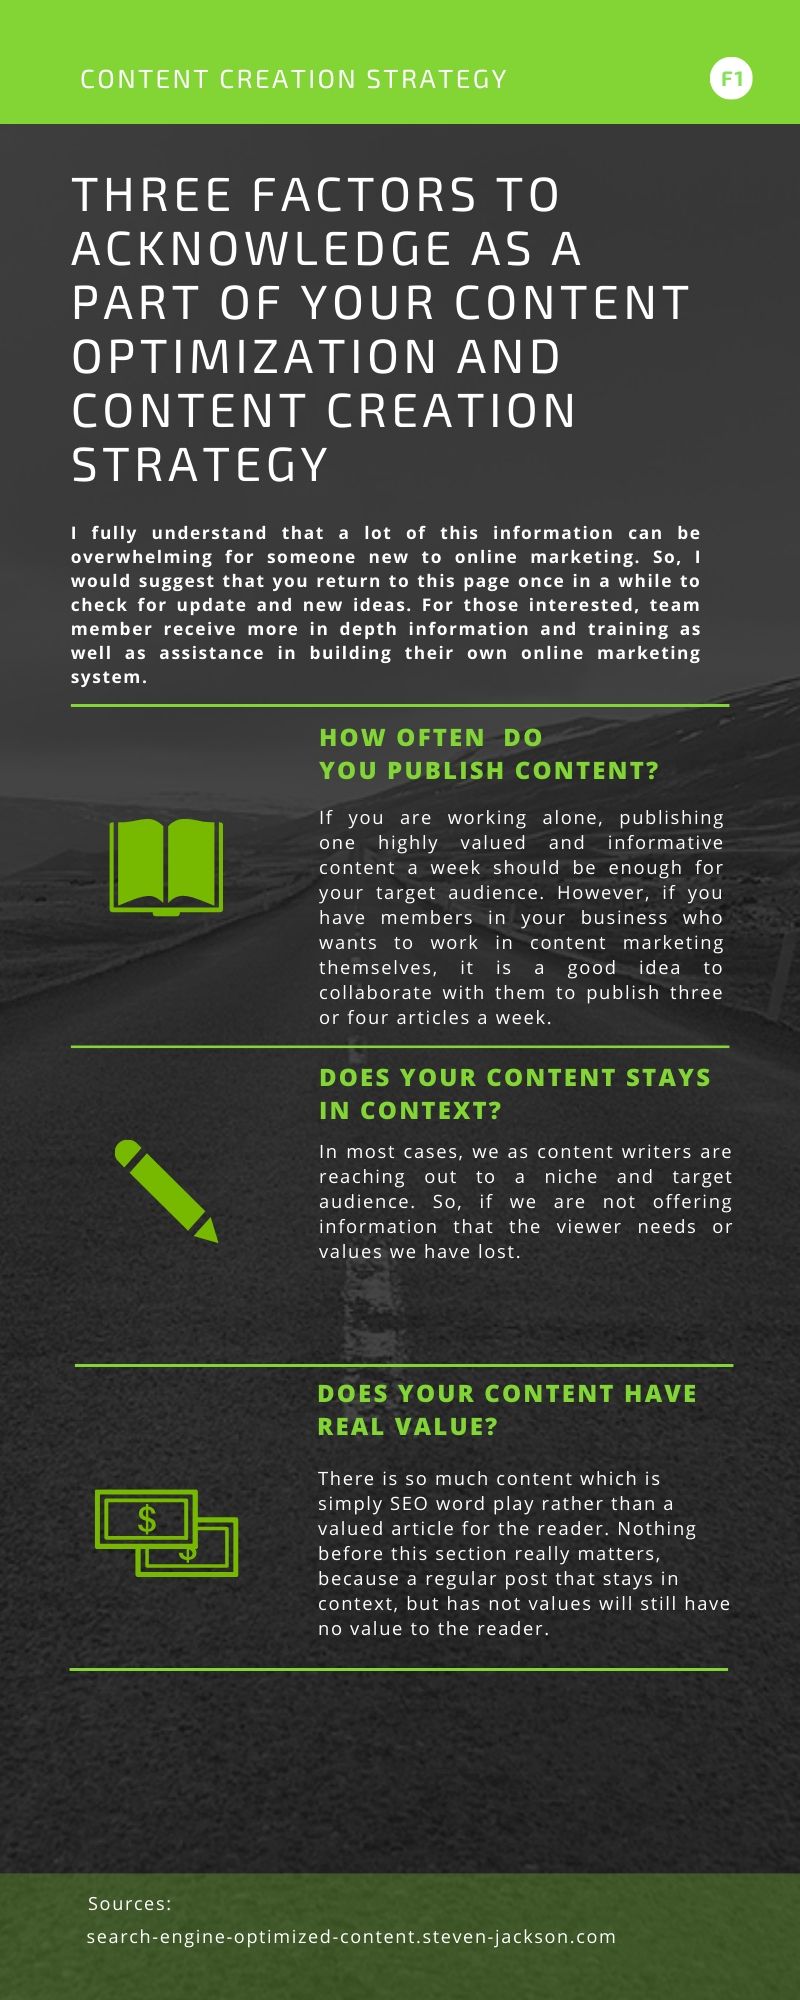 Content creation strategy